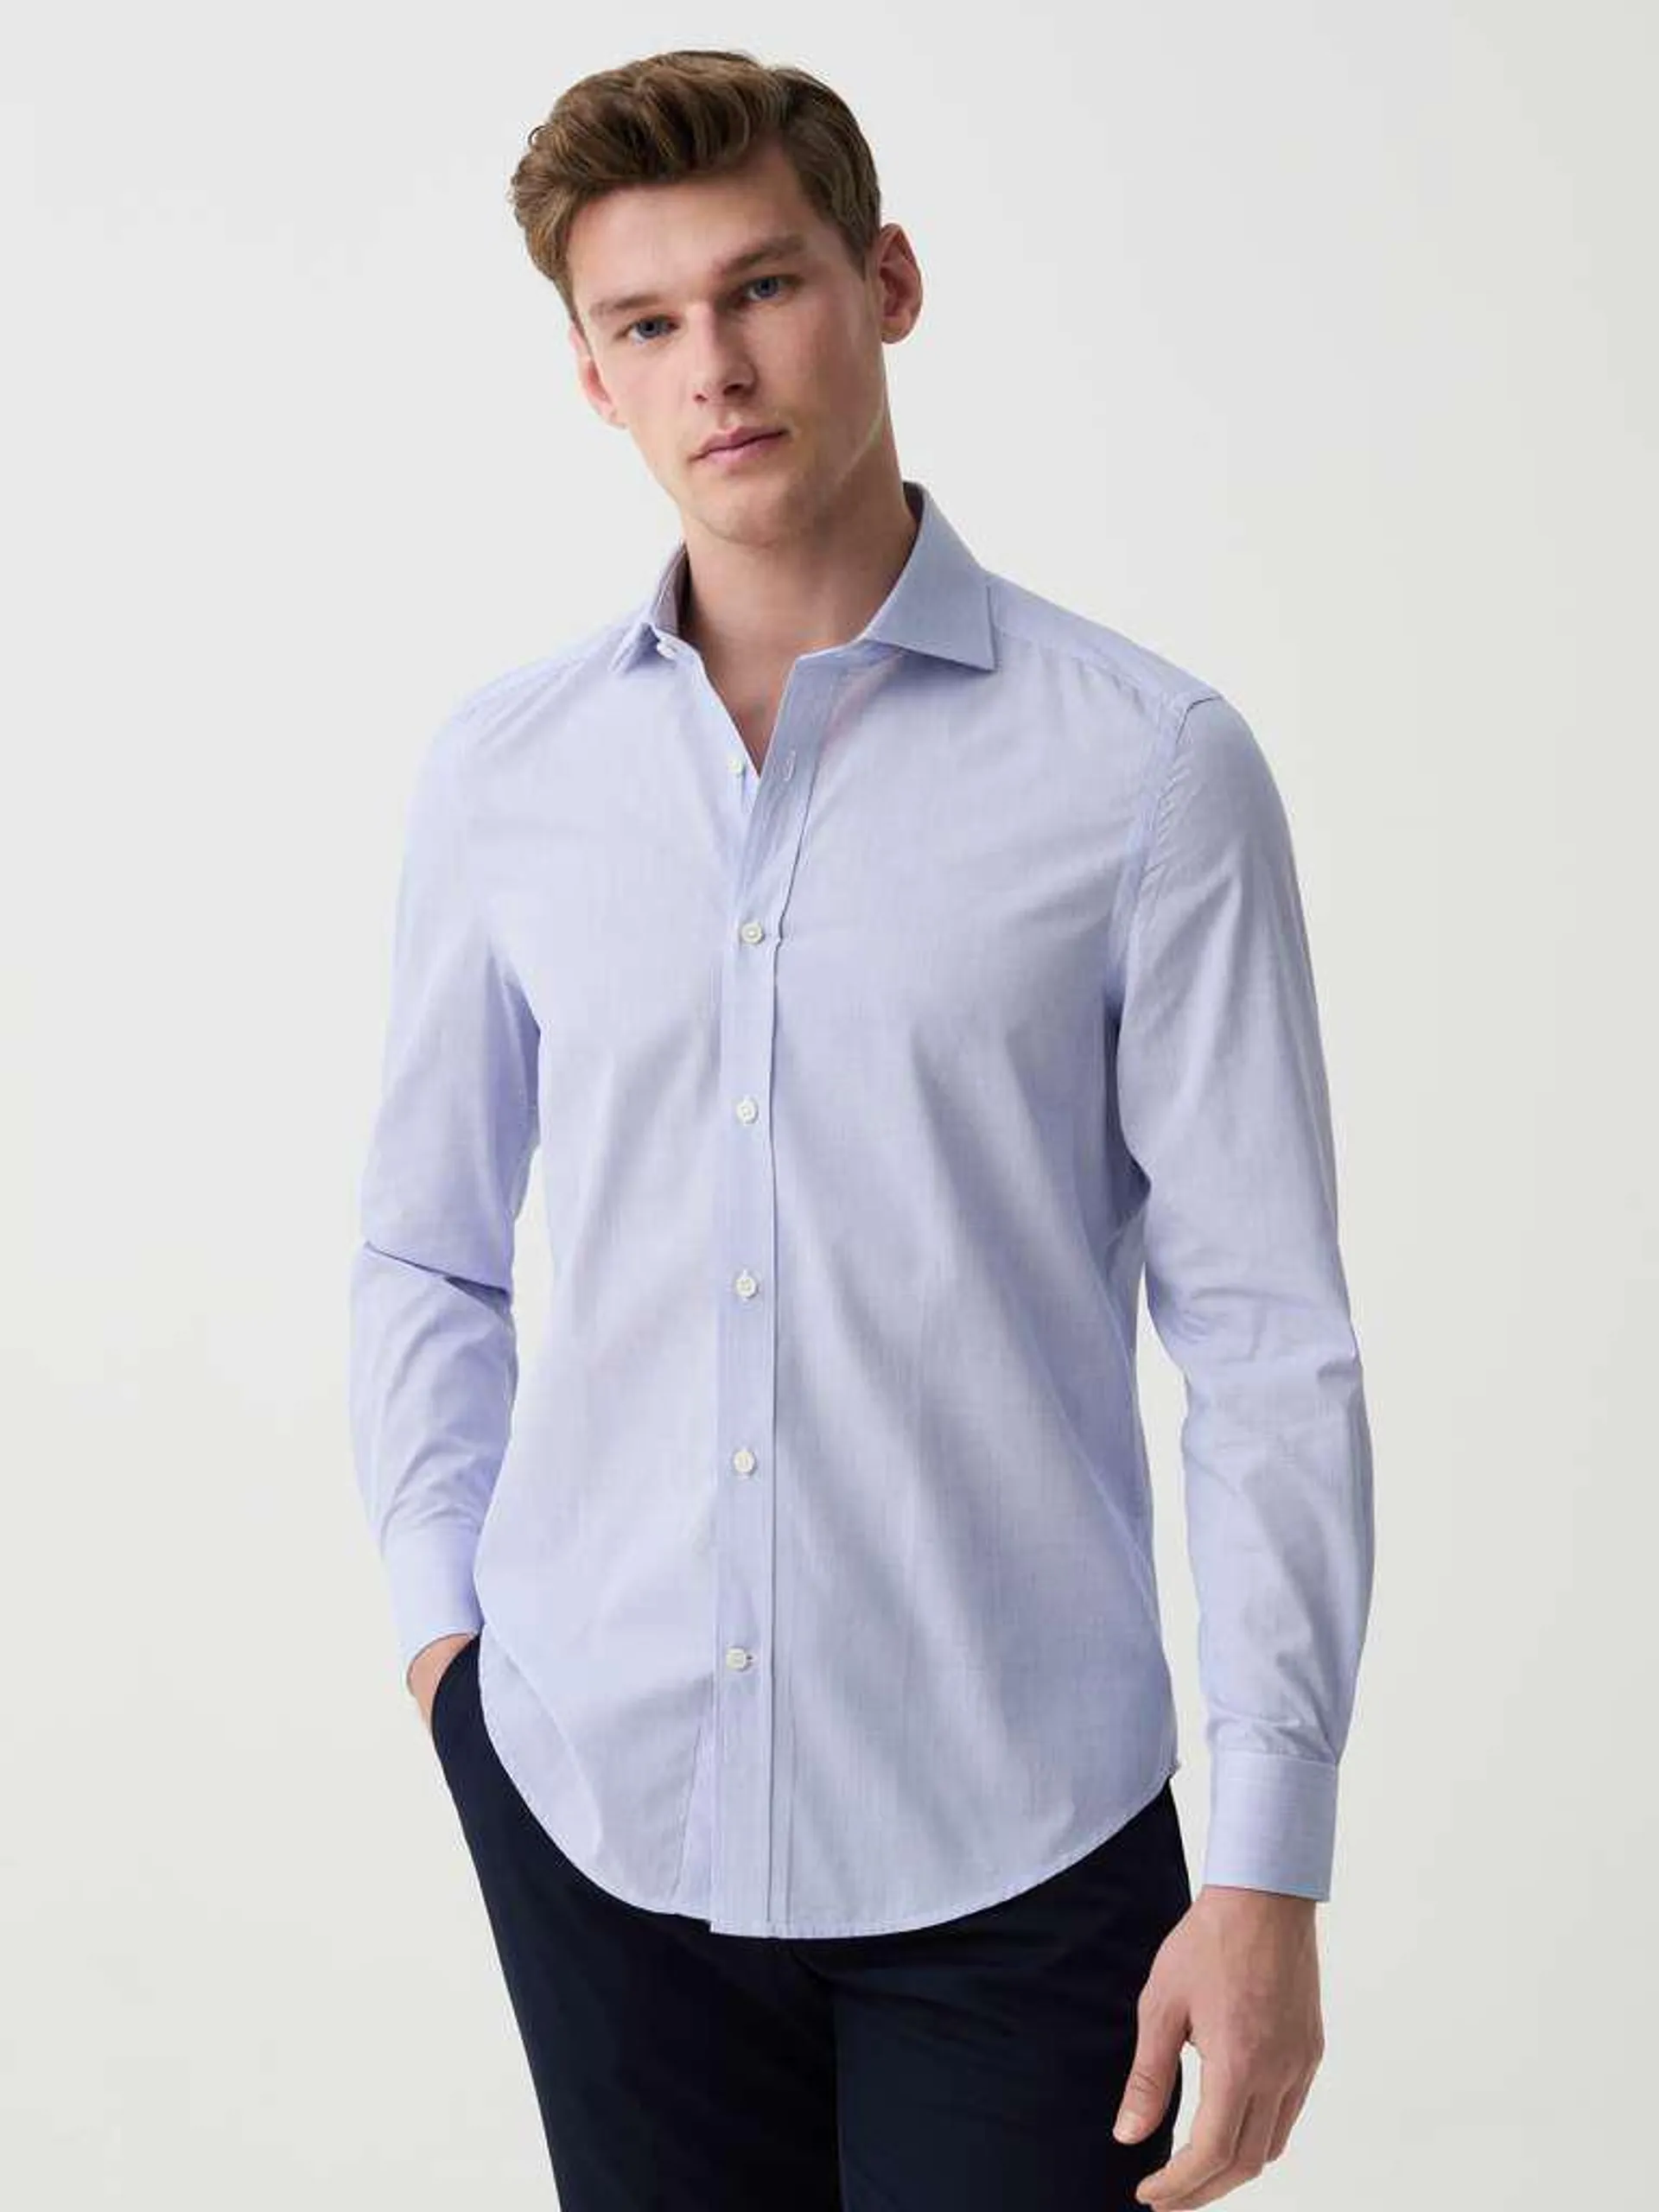 White/Blue Slim-fit shirt with micro pattern